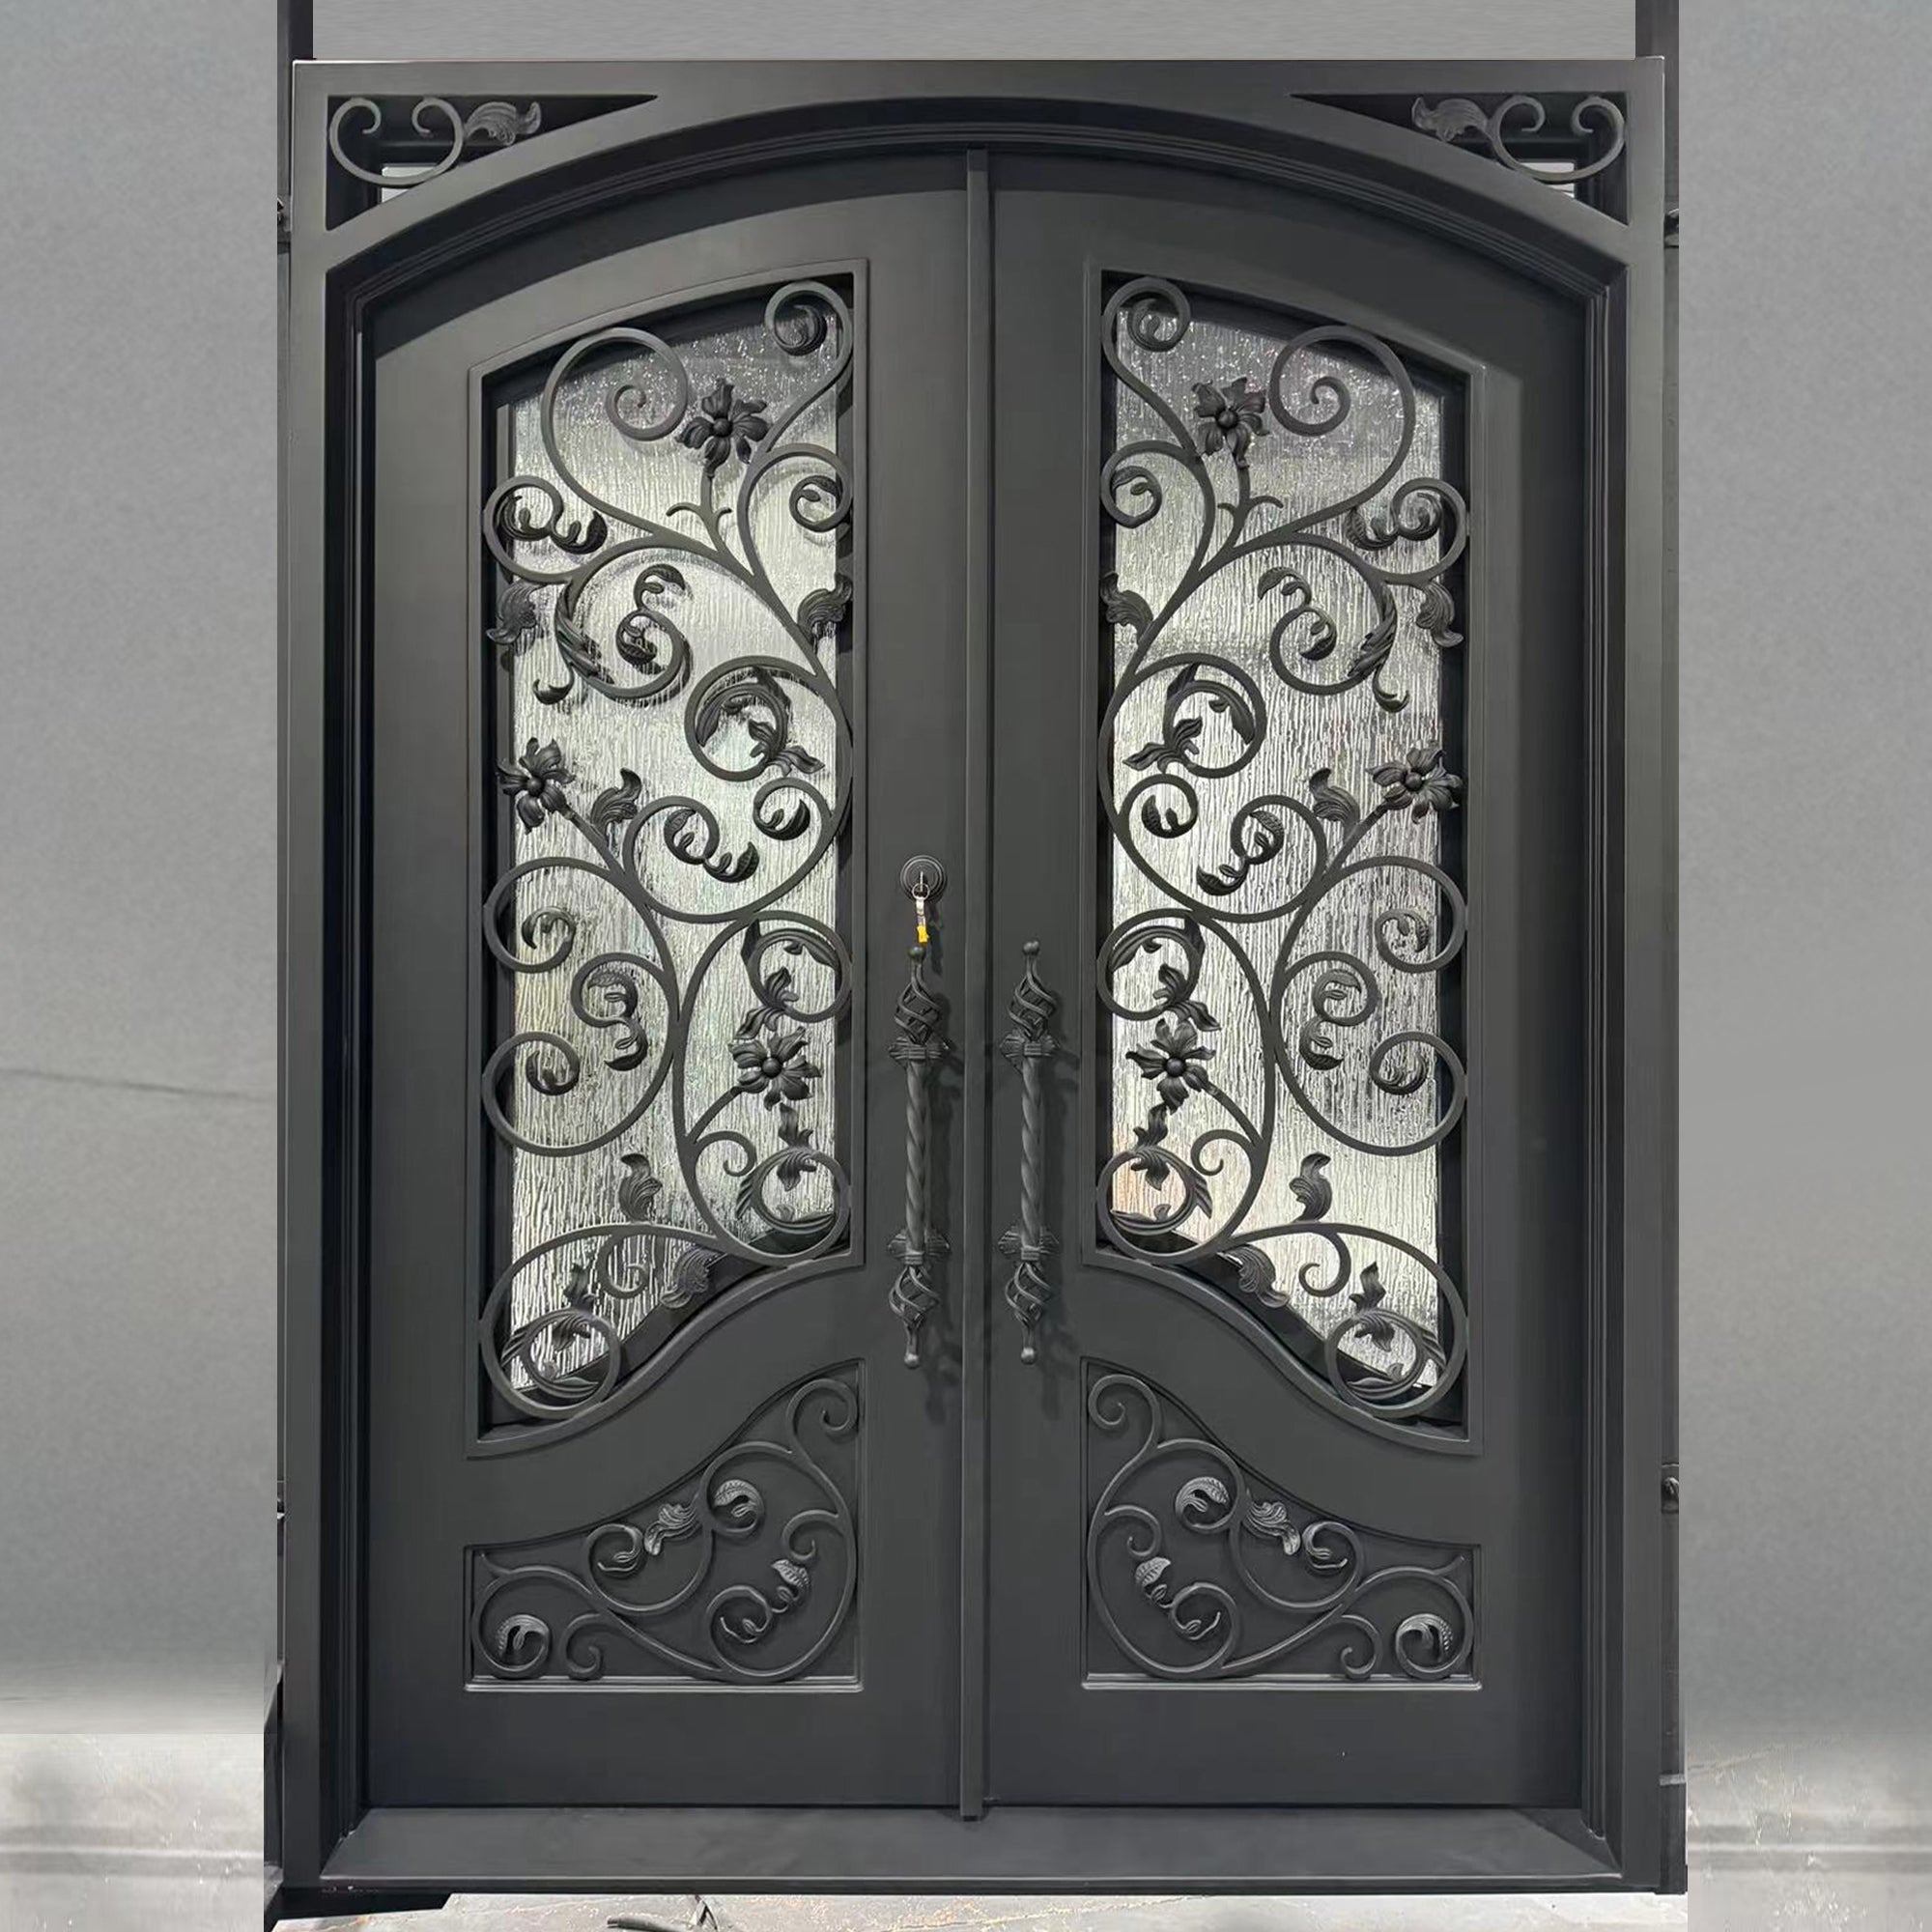 gid thermal break iron front double door with arched top and rain glass